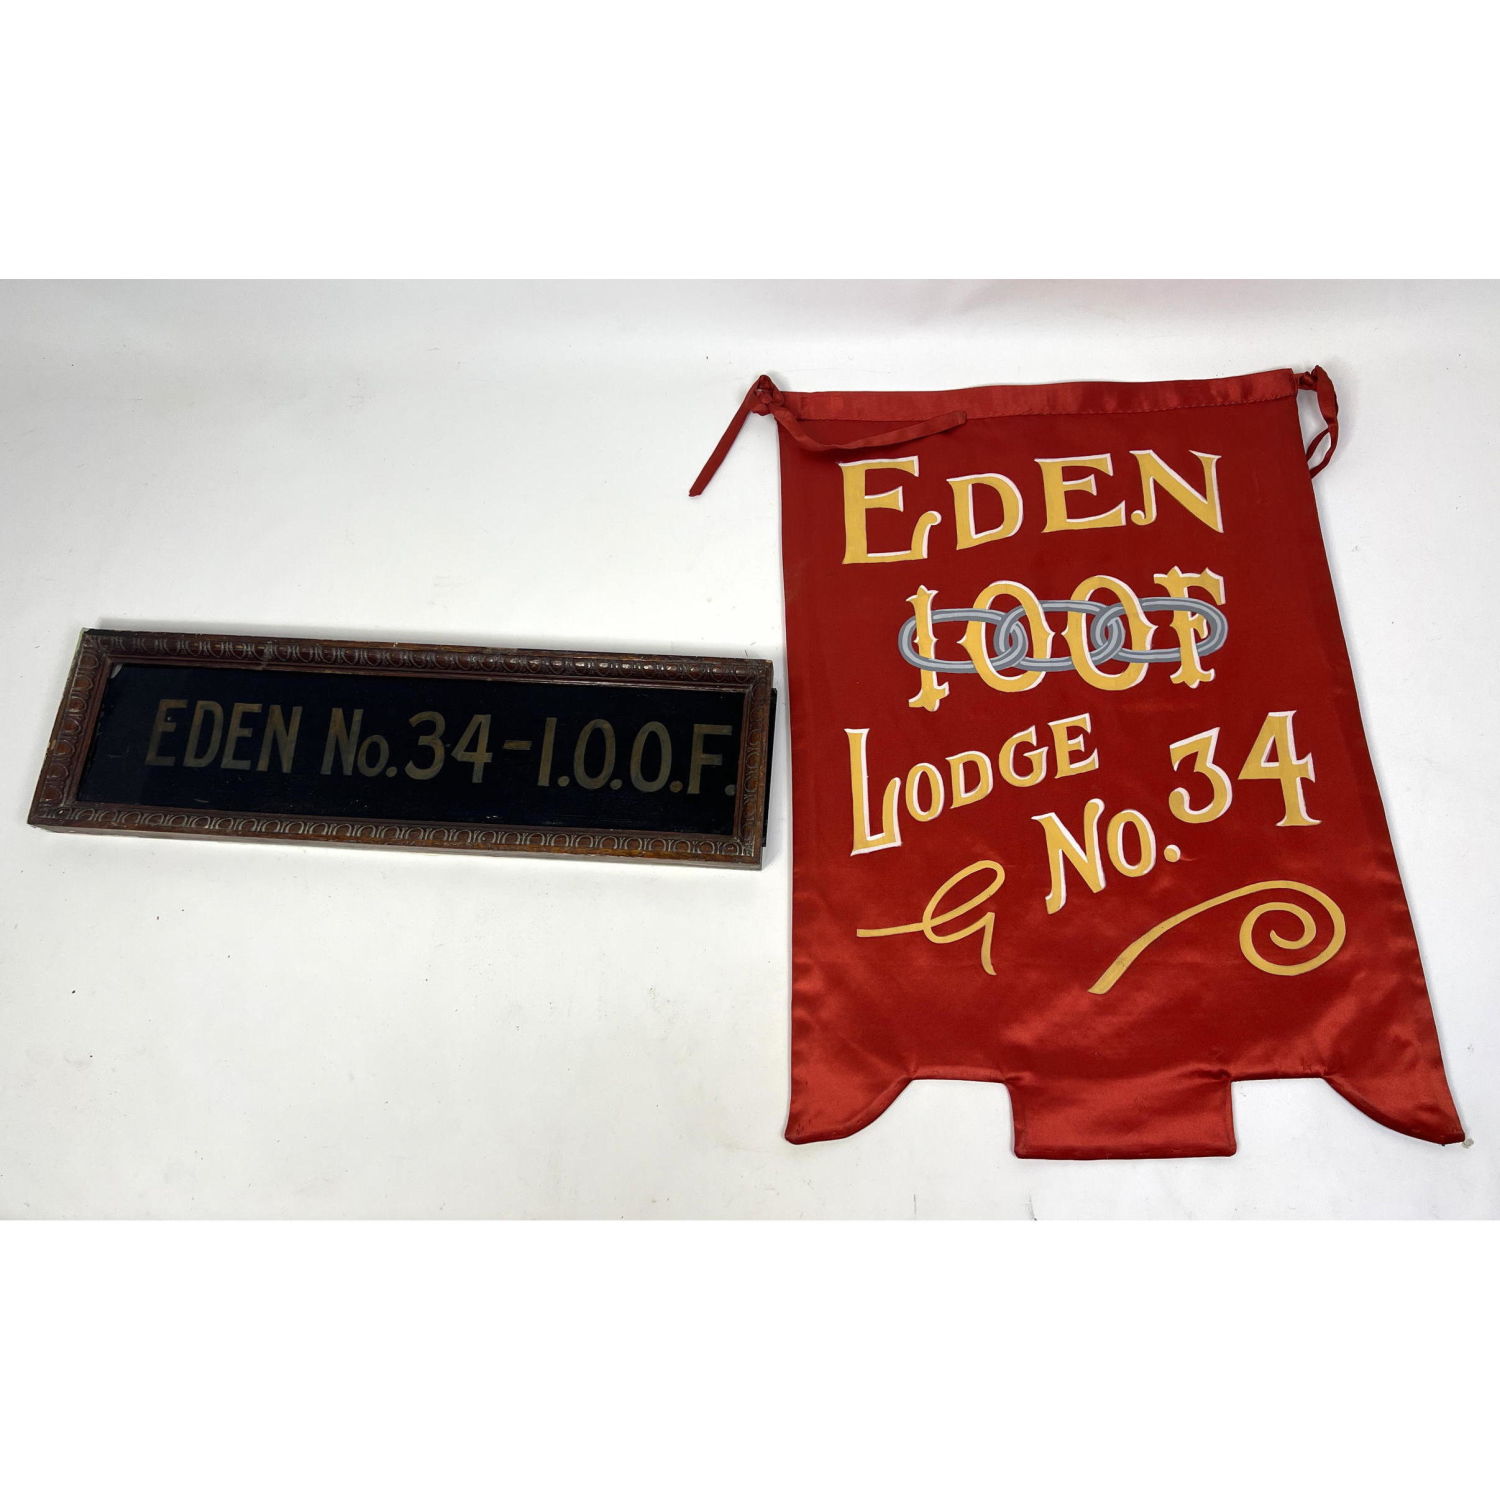 IOOF silk BANNER and sign from 2b91d5